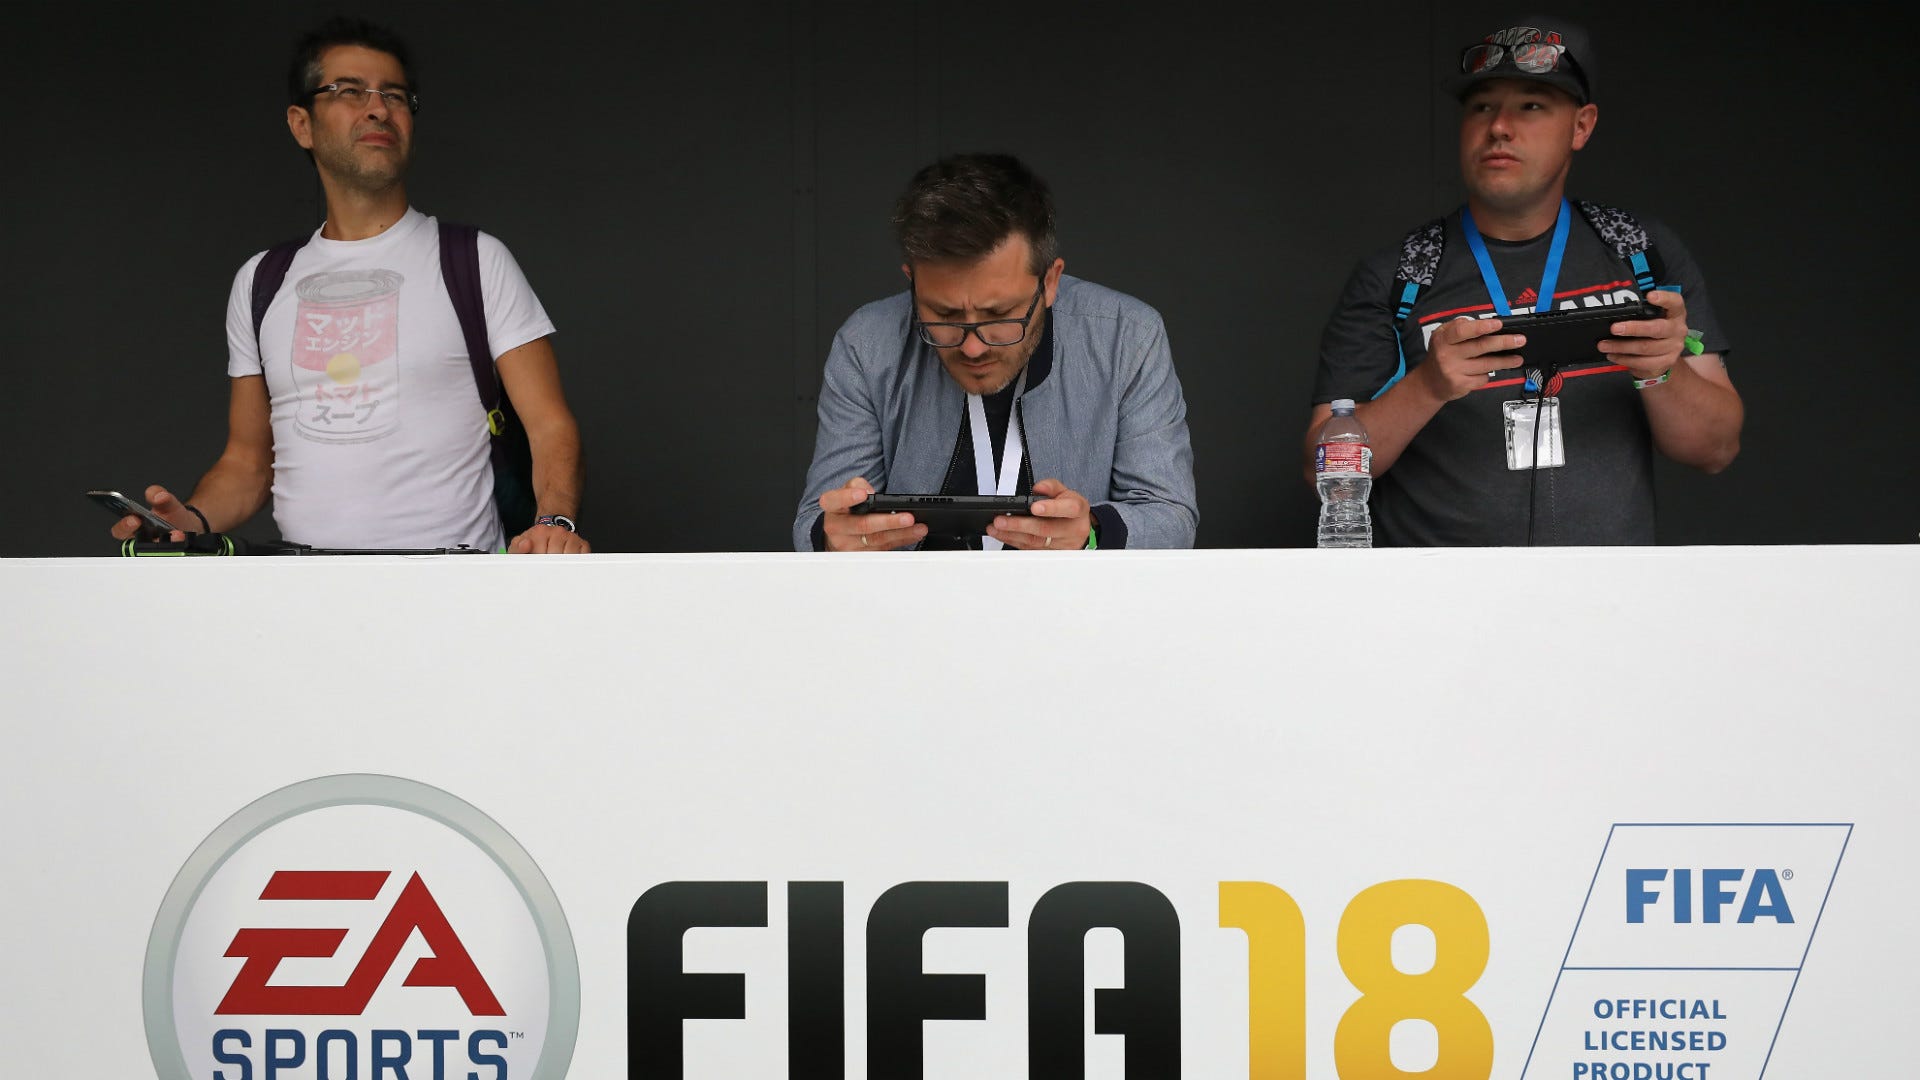 Fifa 18 live chat